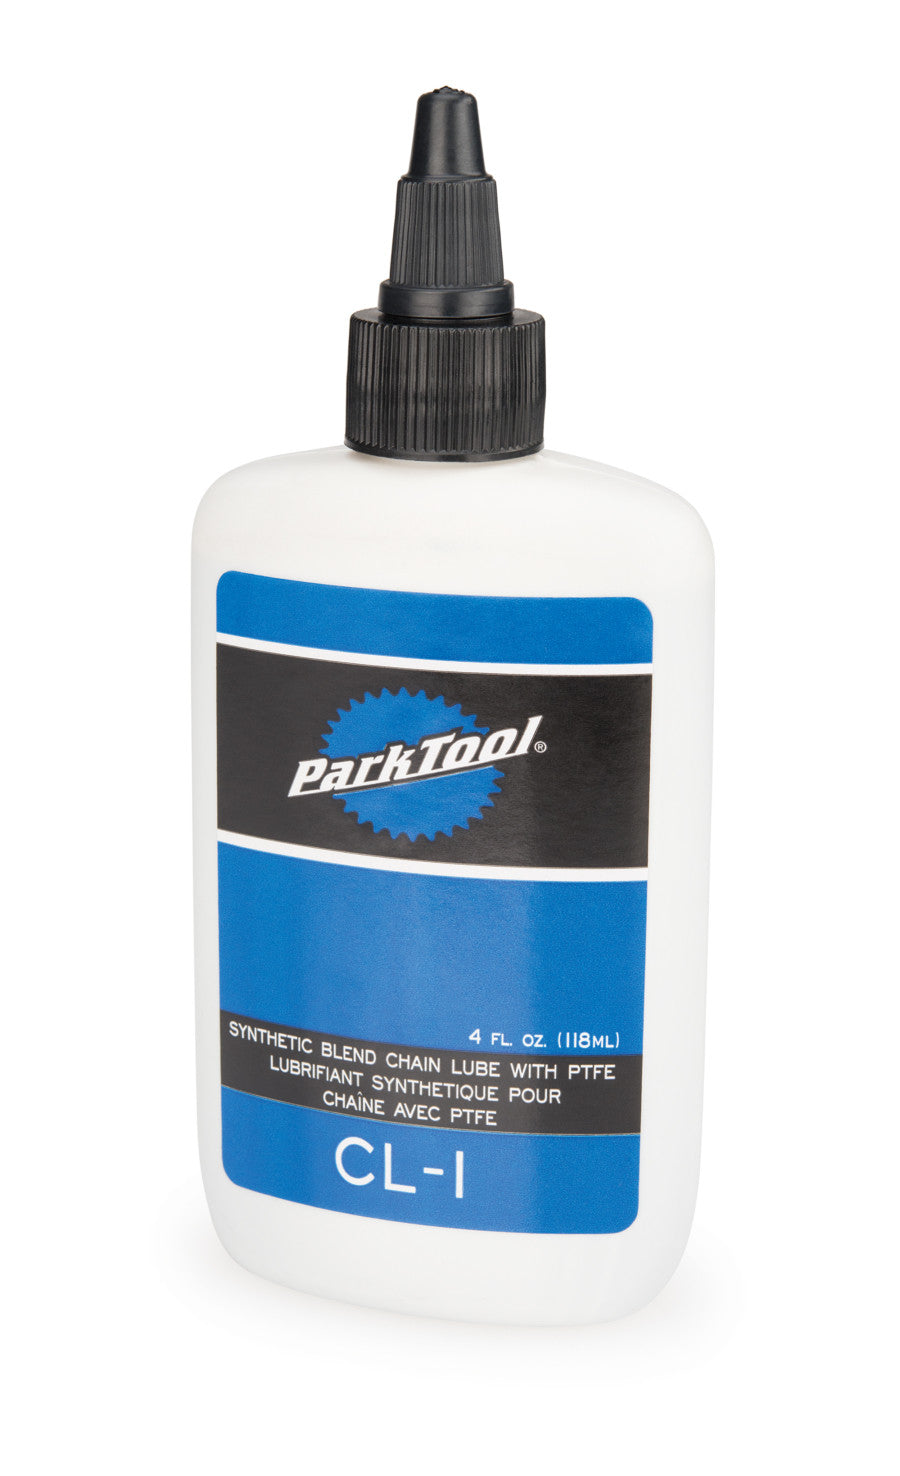 Park Tool CL-1 Chain Lube - RideCX cyclocross store